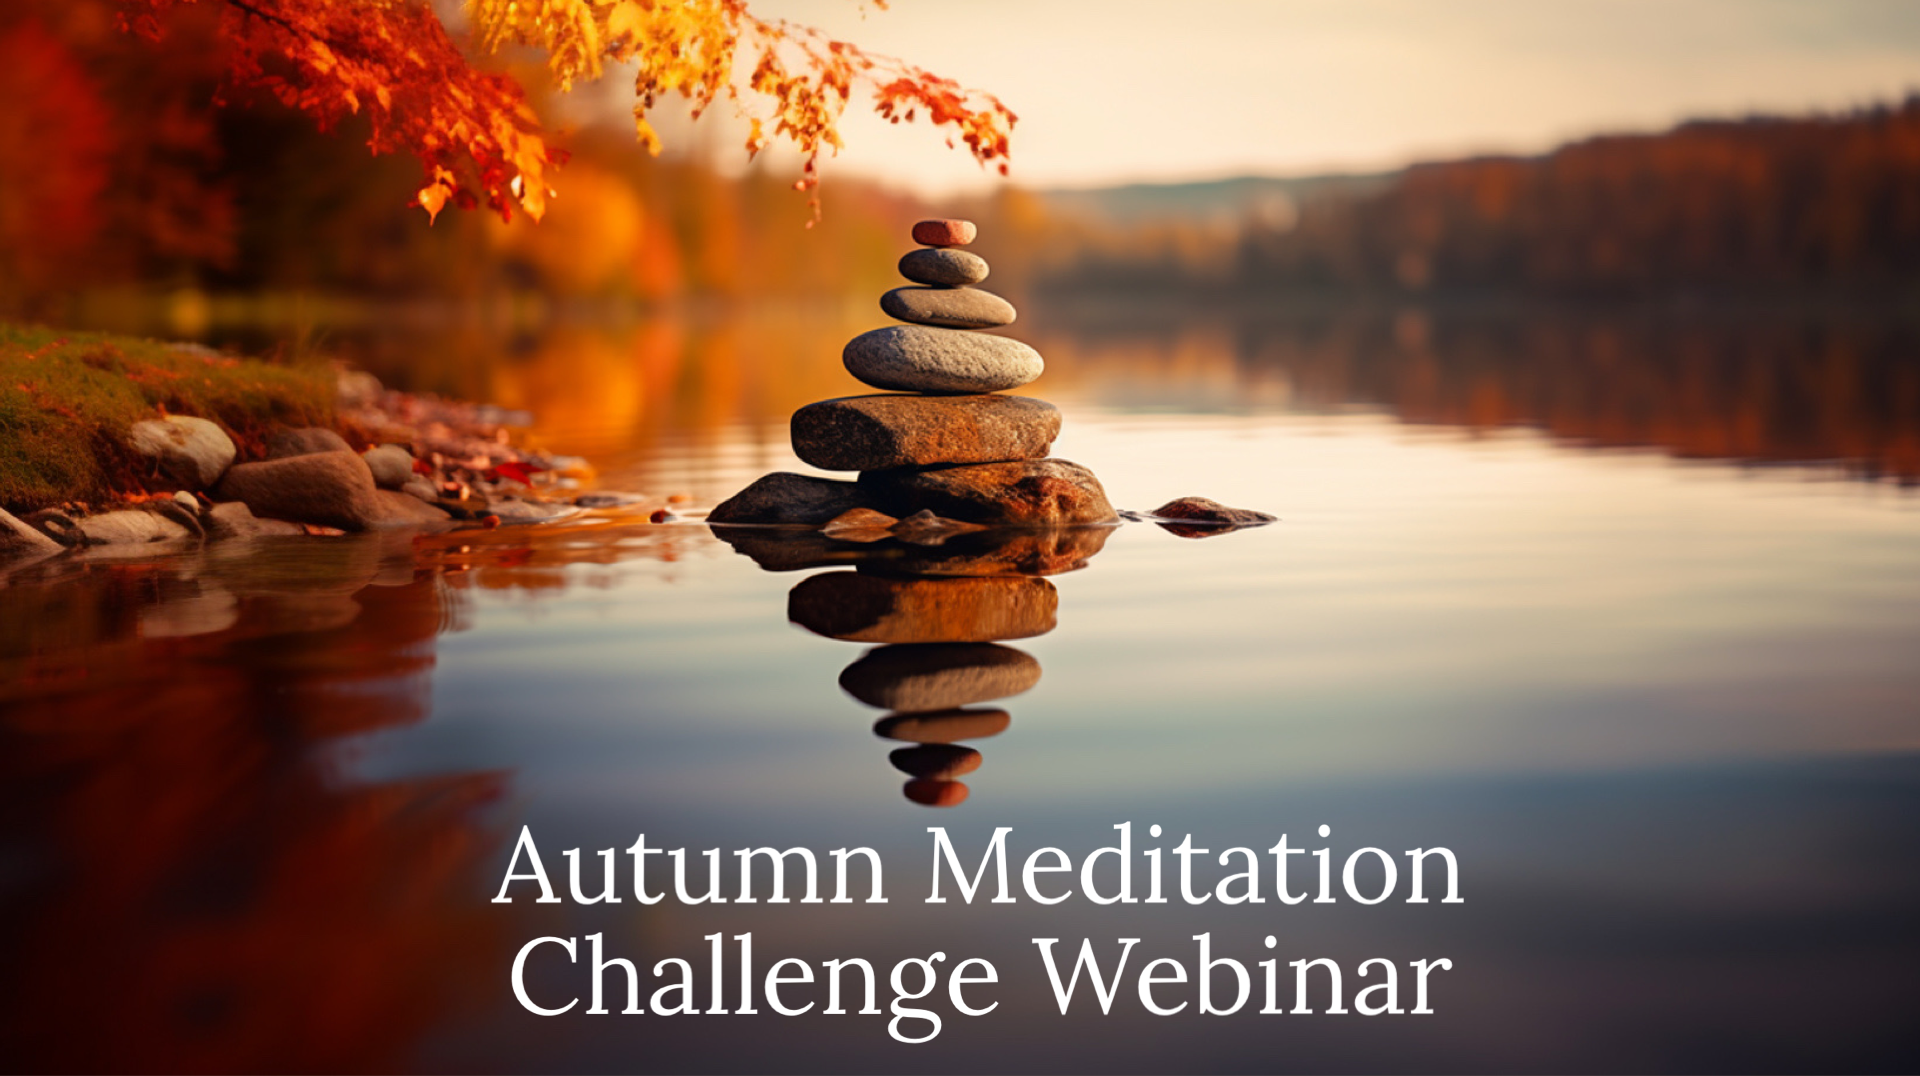 Zen rocks in a lake with an autumn colour maple hanging over - title Autumn Meditation Challenge Webinar